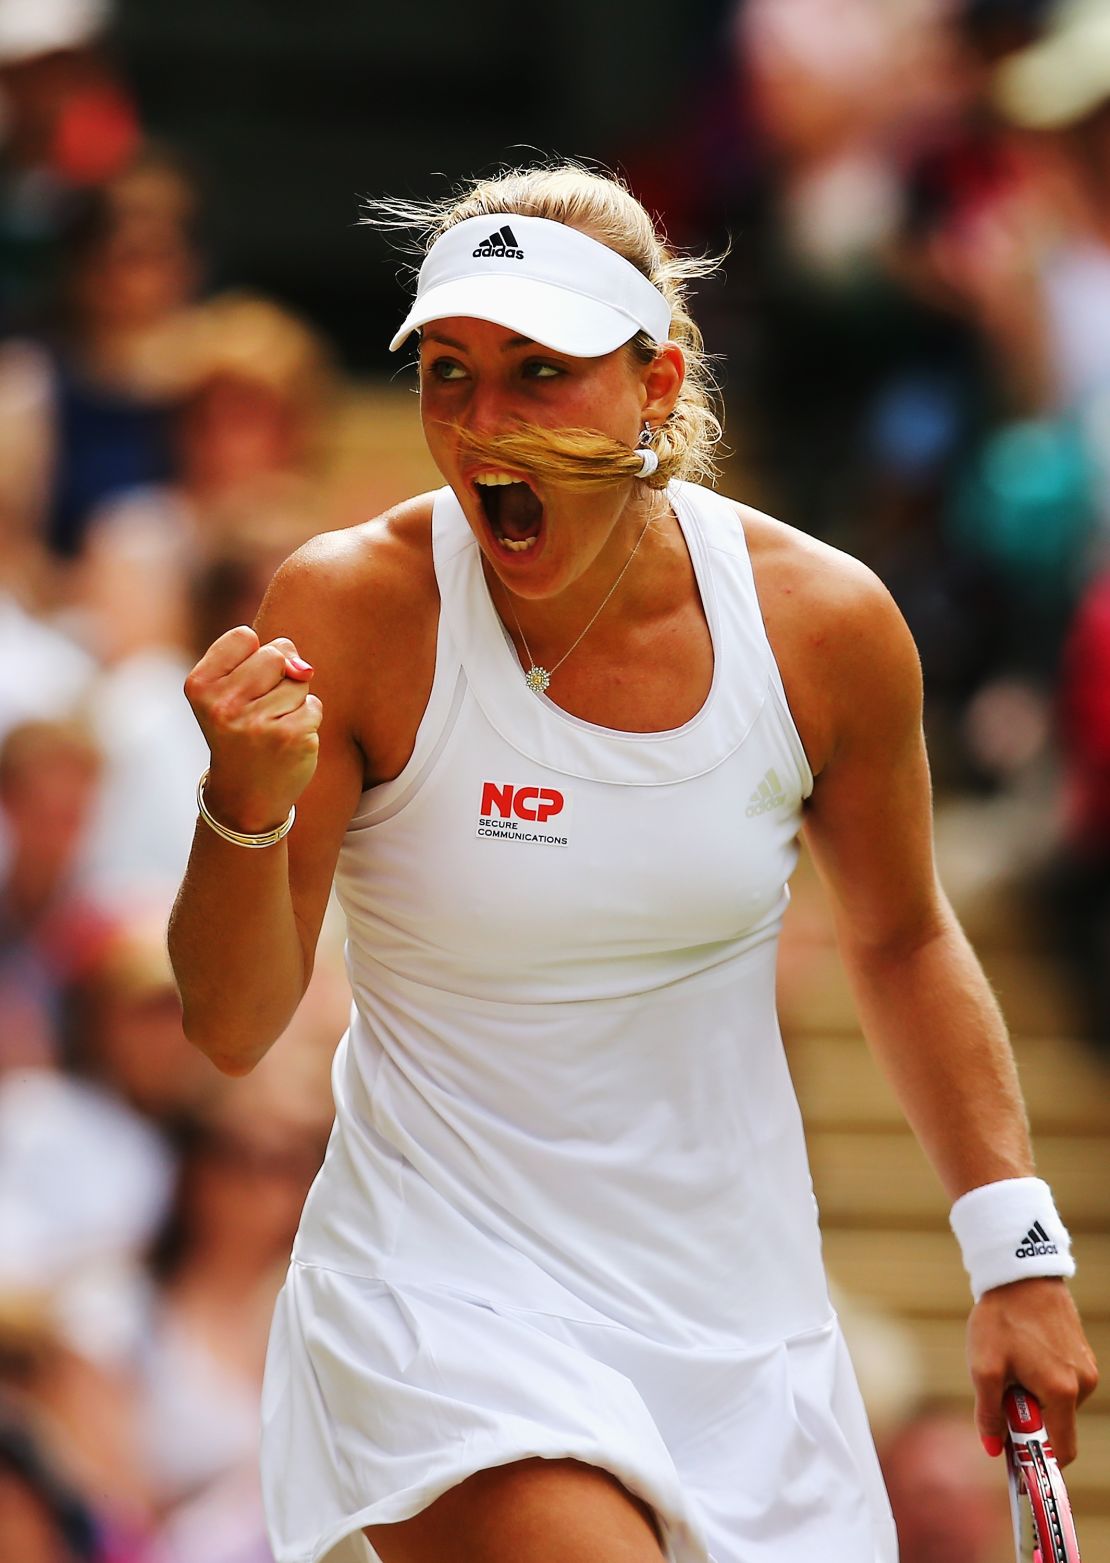 As well as her two grand slam titles, Kerber also reached the 2016 Wimbledon final.